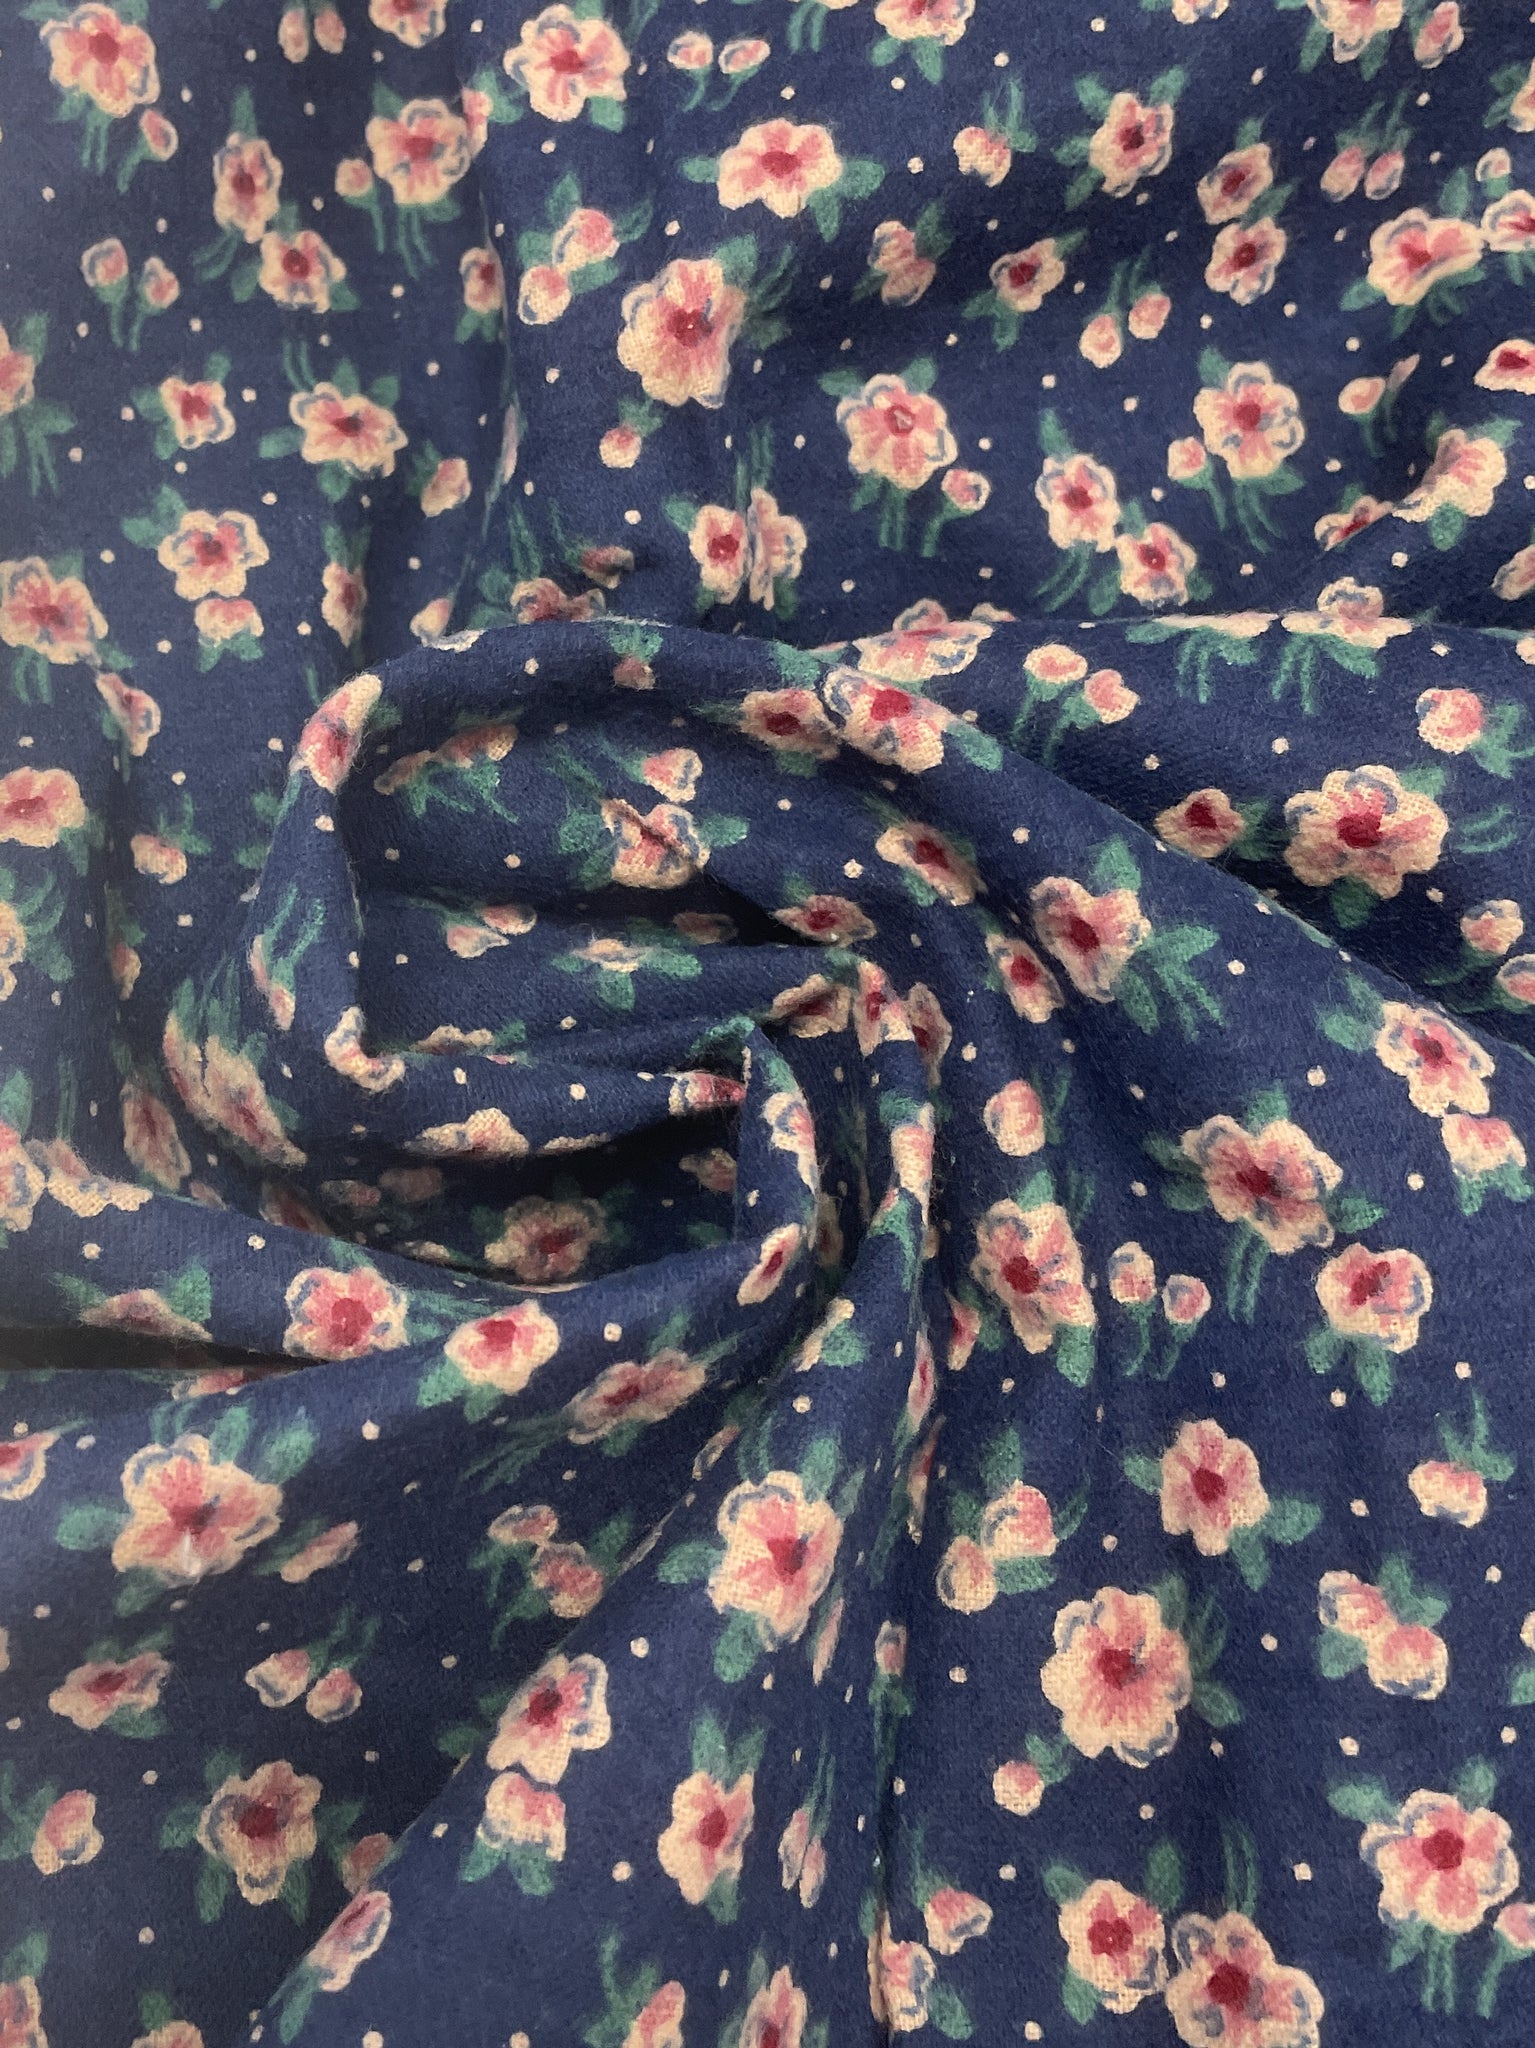 Cotton Flannel Remnant Vintage - Navy Blue with Flowers